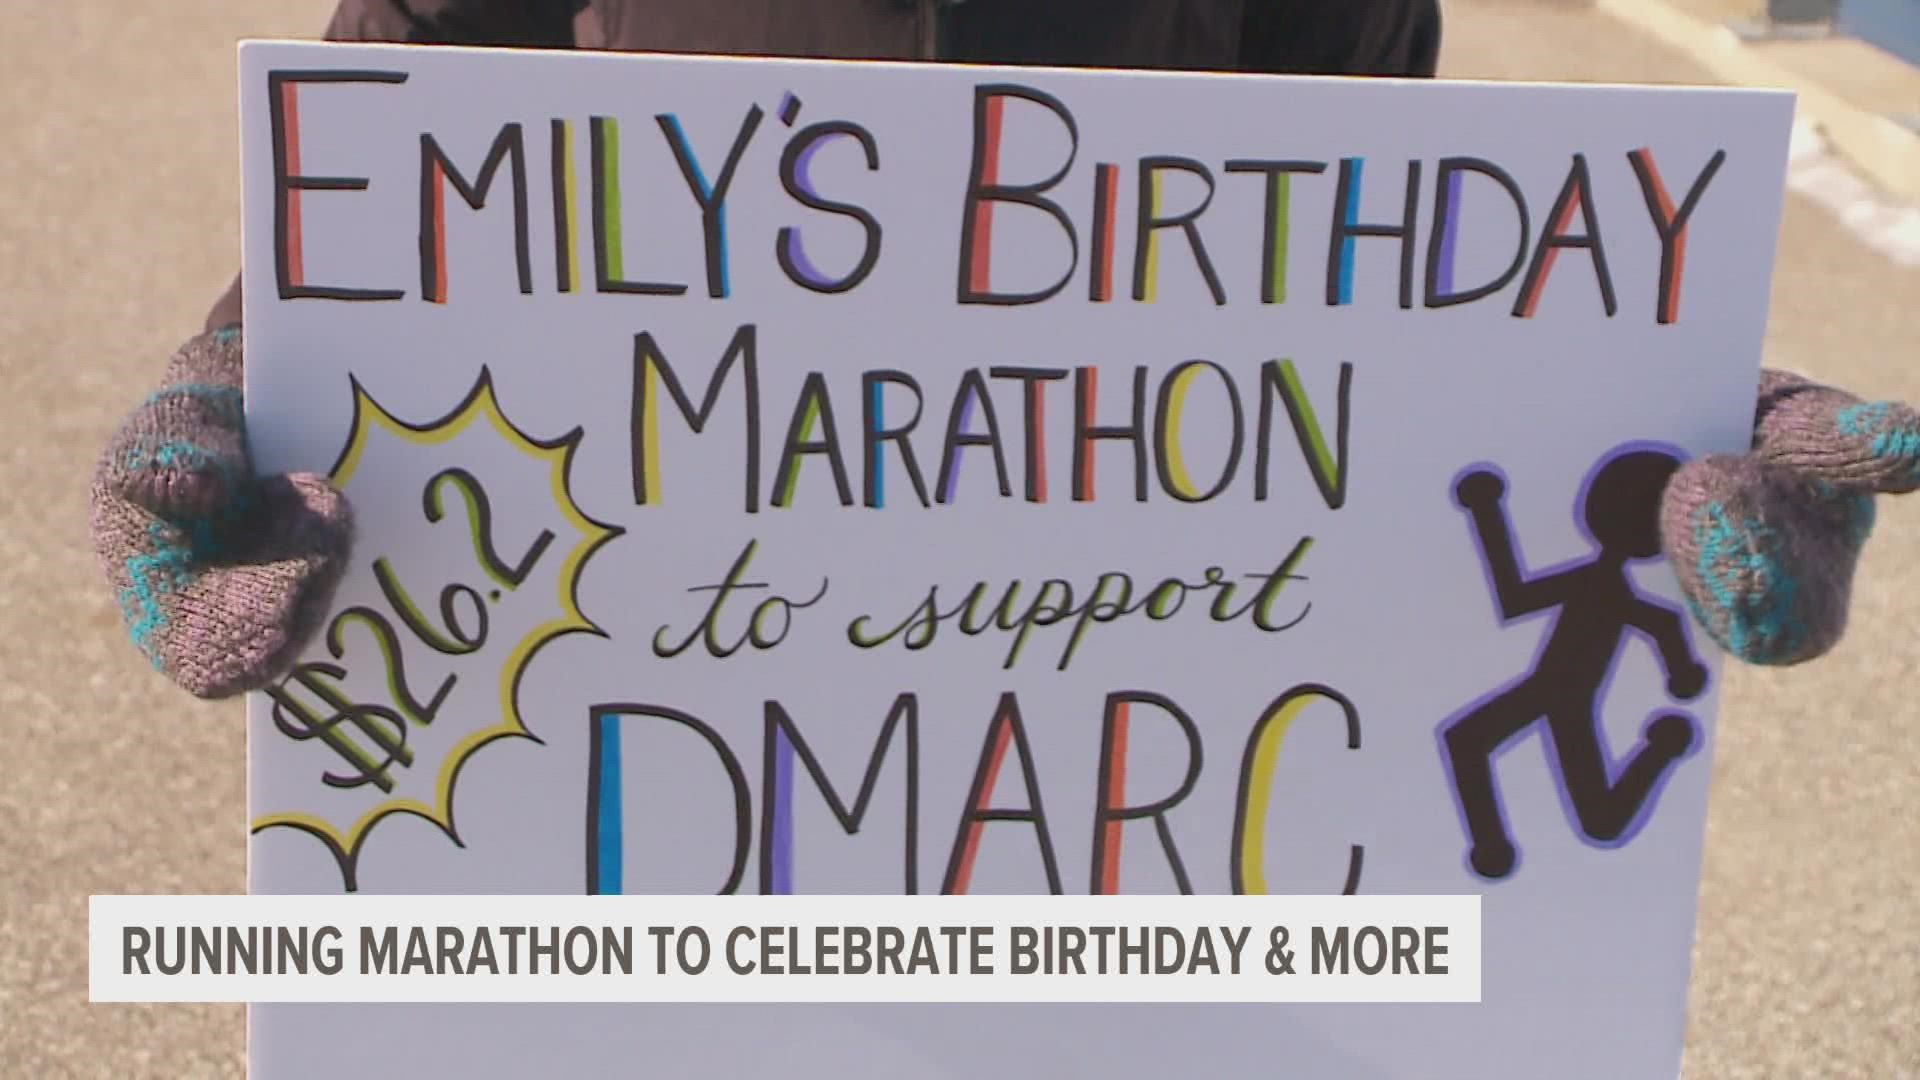 Emily Webb ran 26.2 miles and is encouraging others to donate $26.20 to DMARC, a cause close to her heart. She's also matching the first $500 donated.